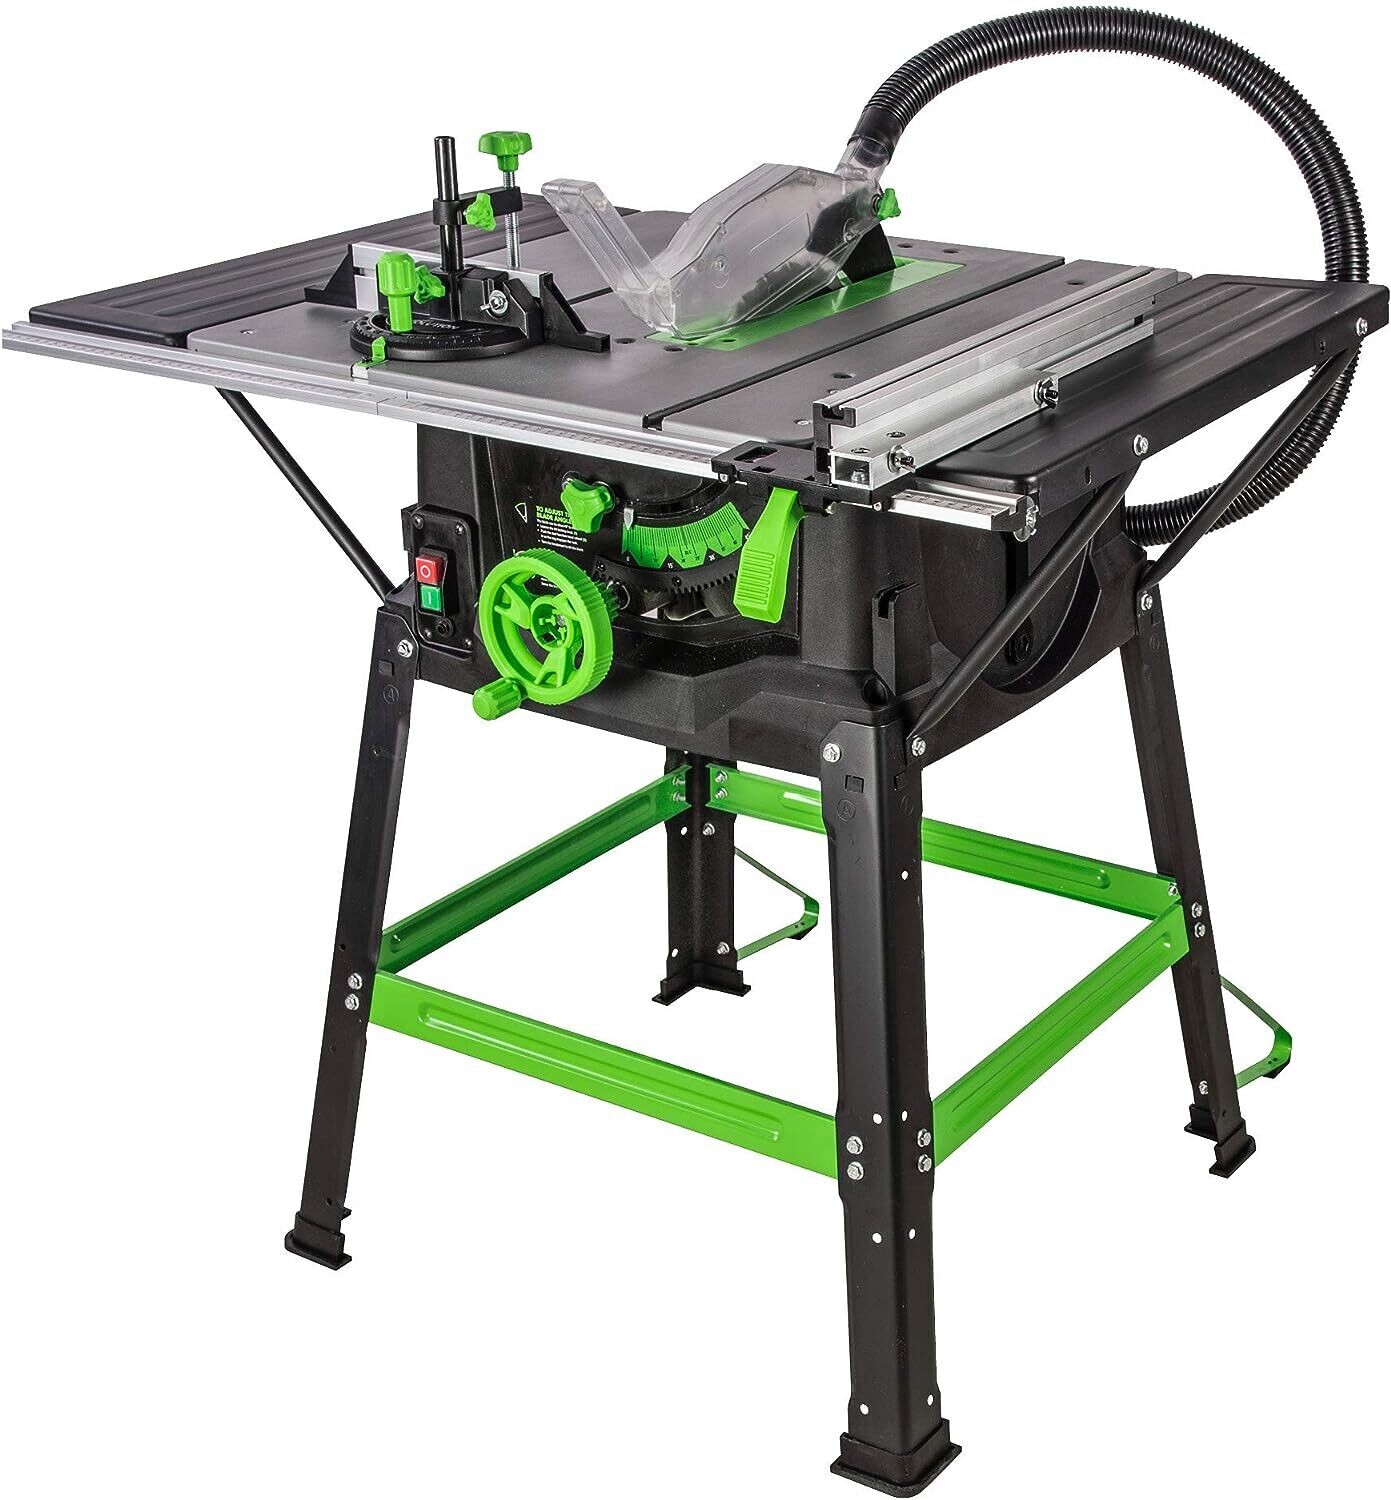 1500W, 230 V, Multi-Material Cutting Table Saw